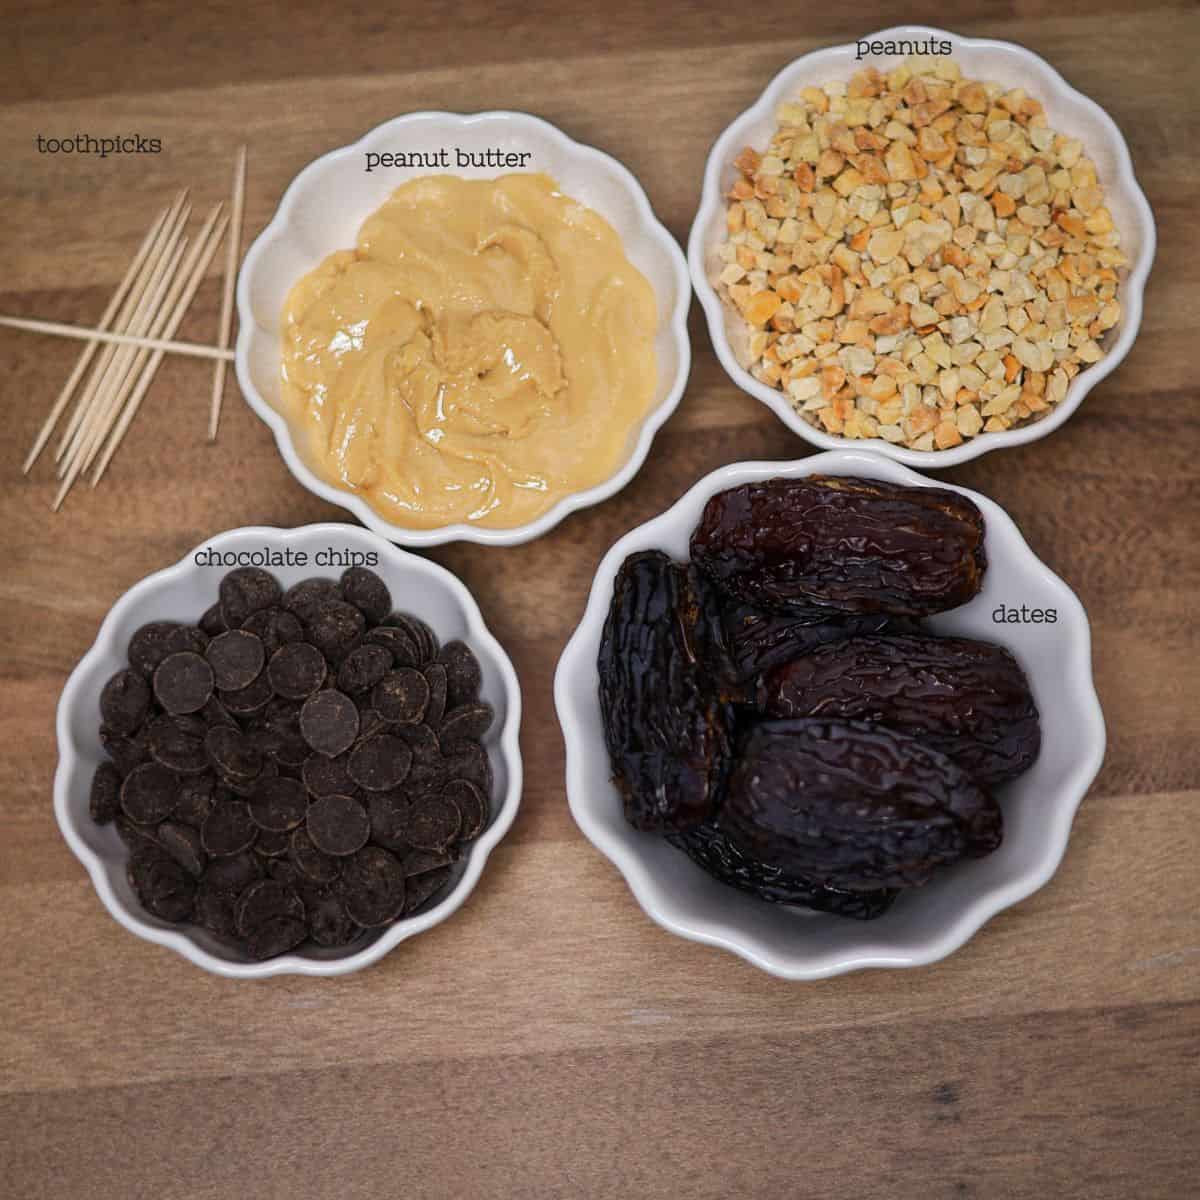 An overhead view of ingredients for chocolate covered stuffed dates: medjool dates, natural peanut butter, chocolate chips, crushed peanuts, and toothpicks.